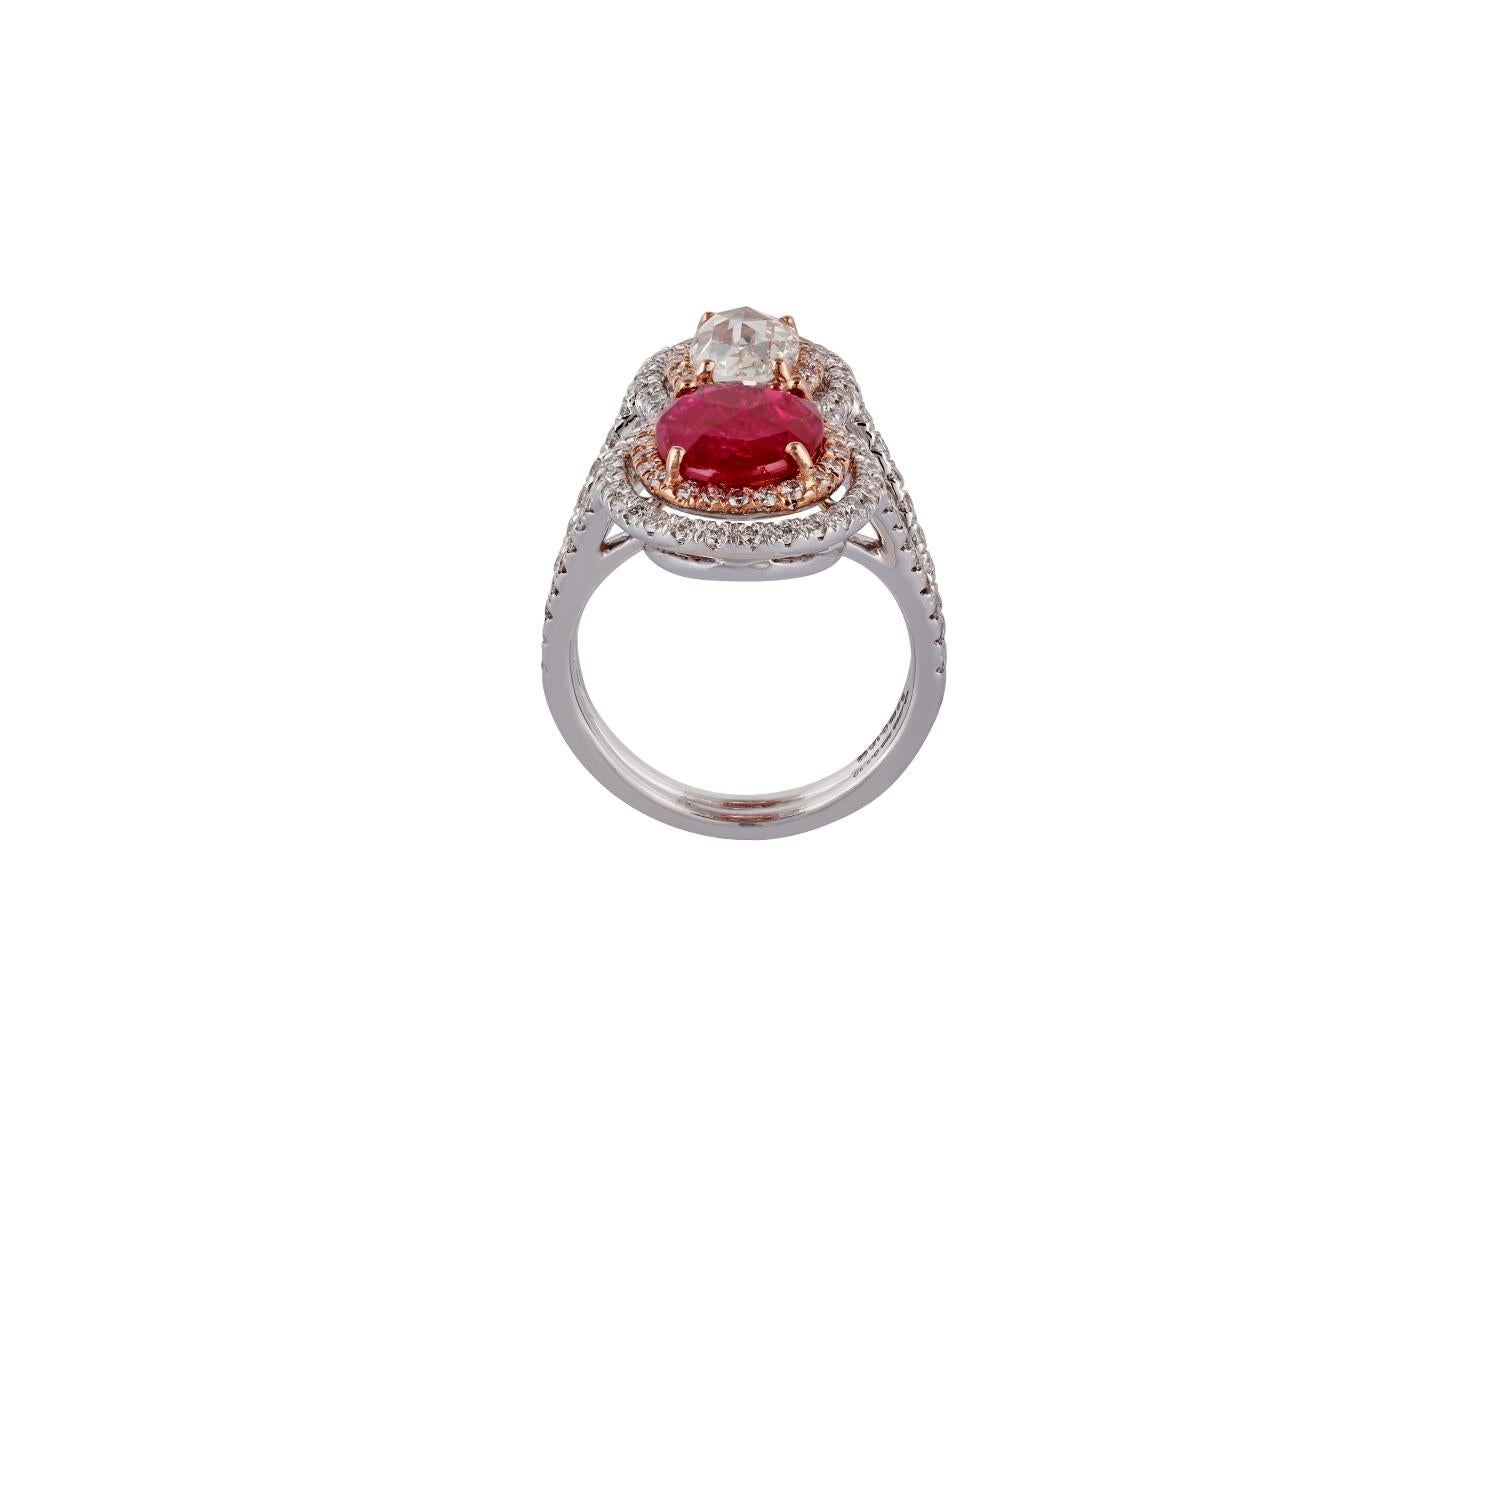 It is an exclusive ruby & diamond ring features an oval-shaped rose-cut 2.09 carat of Mozambique ruby with an oval-shaped rose-cut 0.98 carat of diamond & 109 pieces of round brilliant cut diamonds weight 1.12 carat, the entire ring is studded in